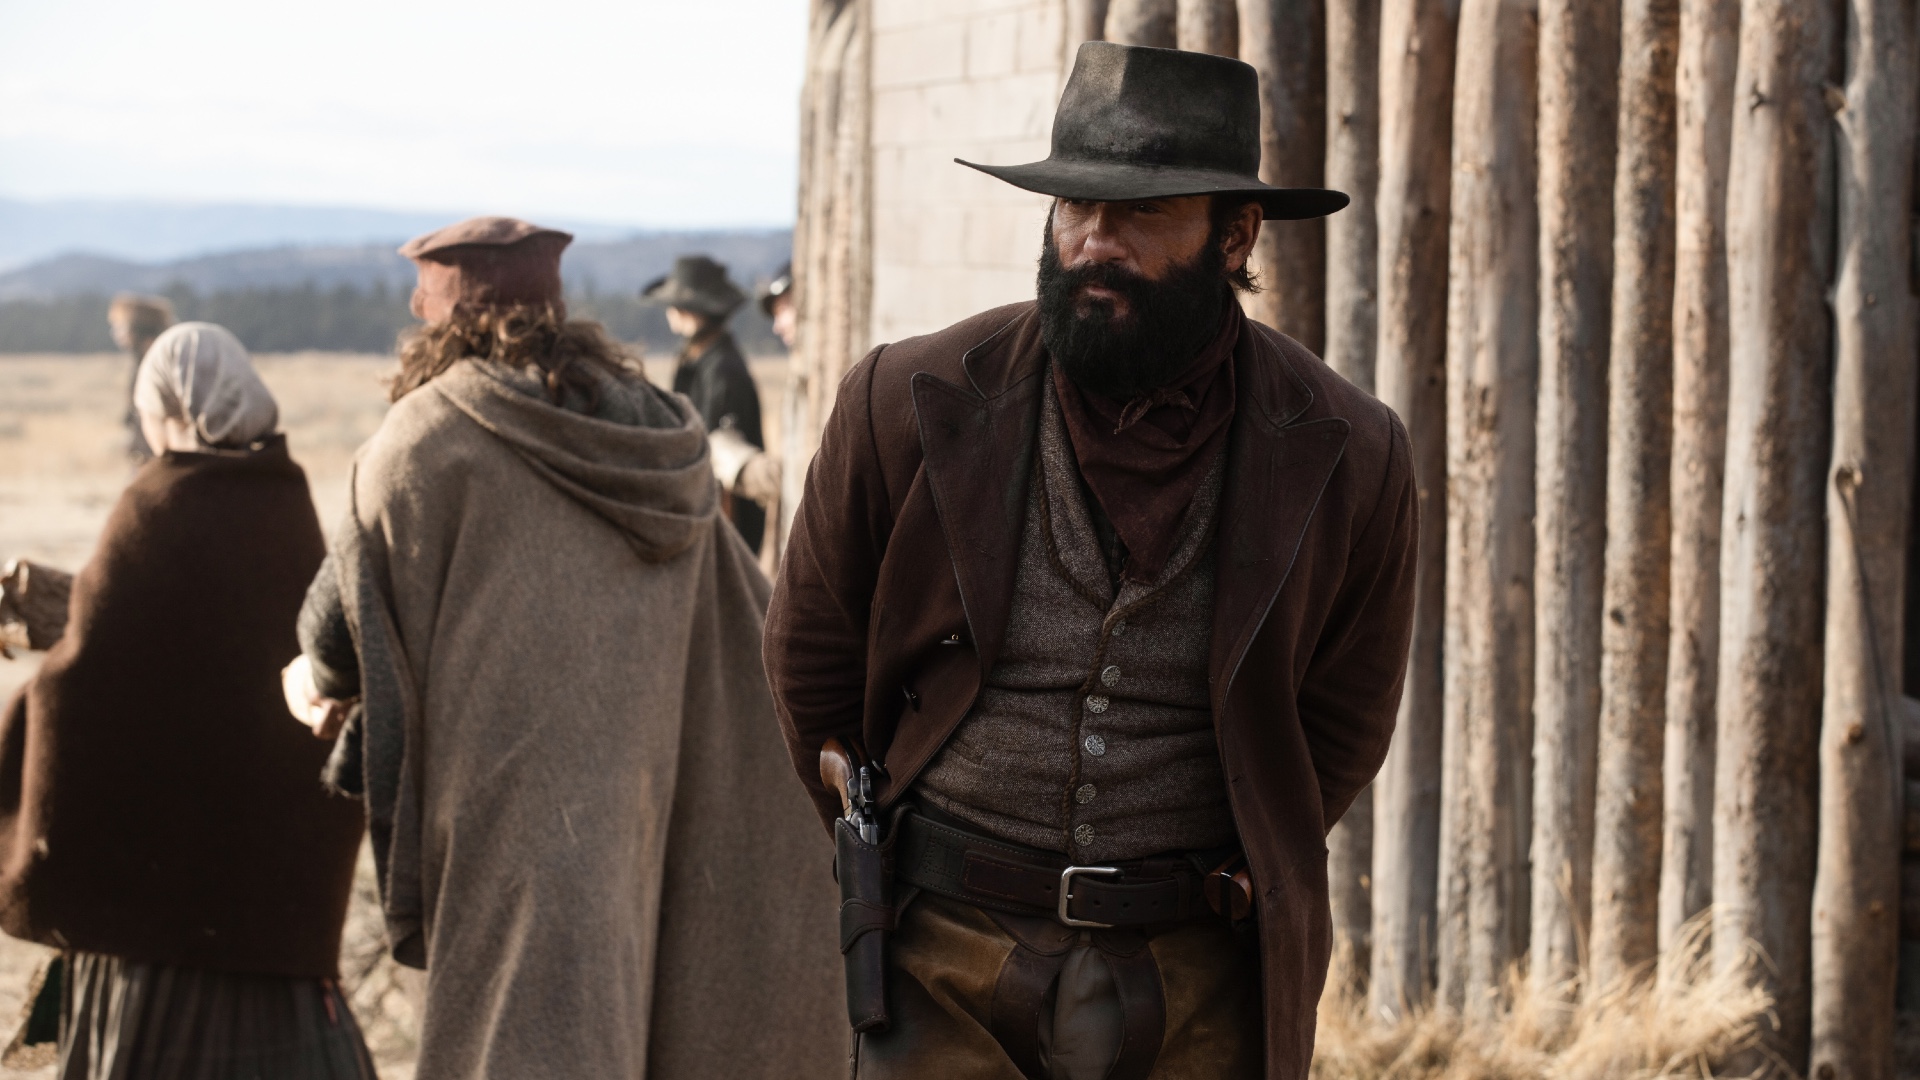 1883 Season 2: What Does the Future Look Like for the Yellowstone ...